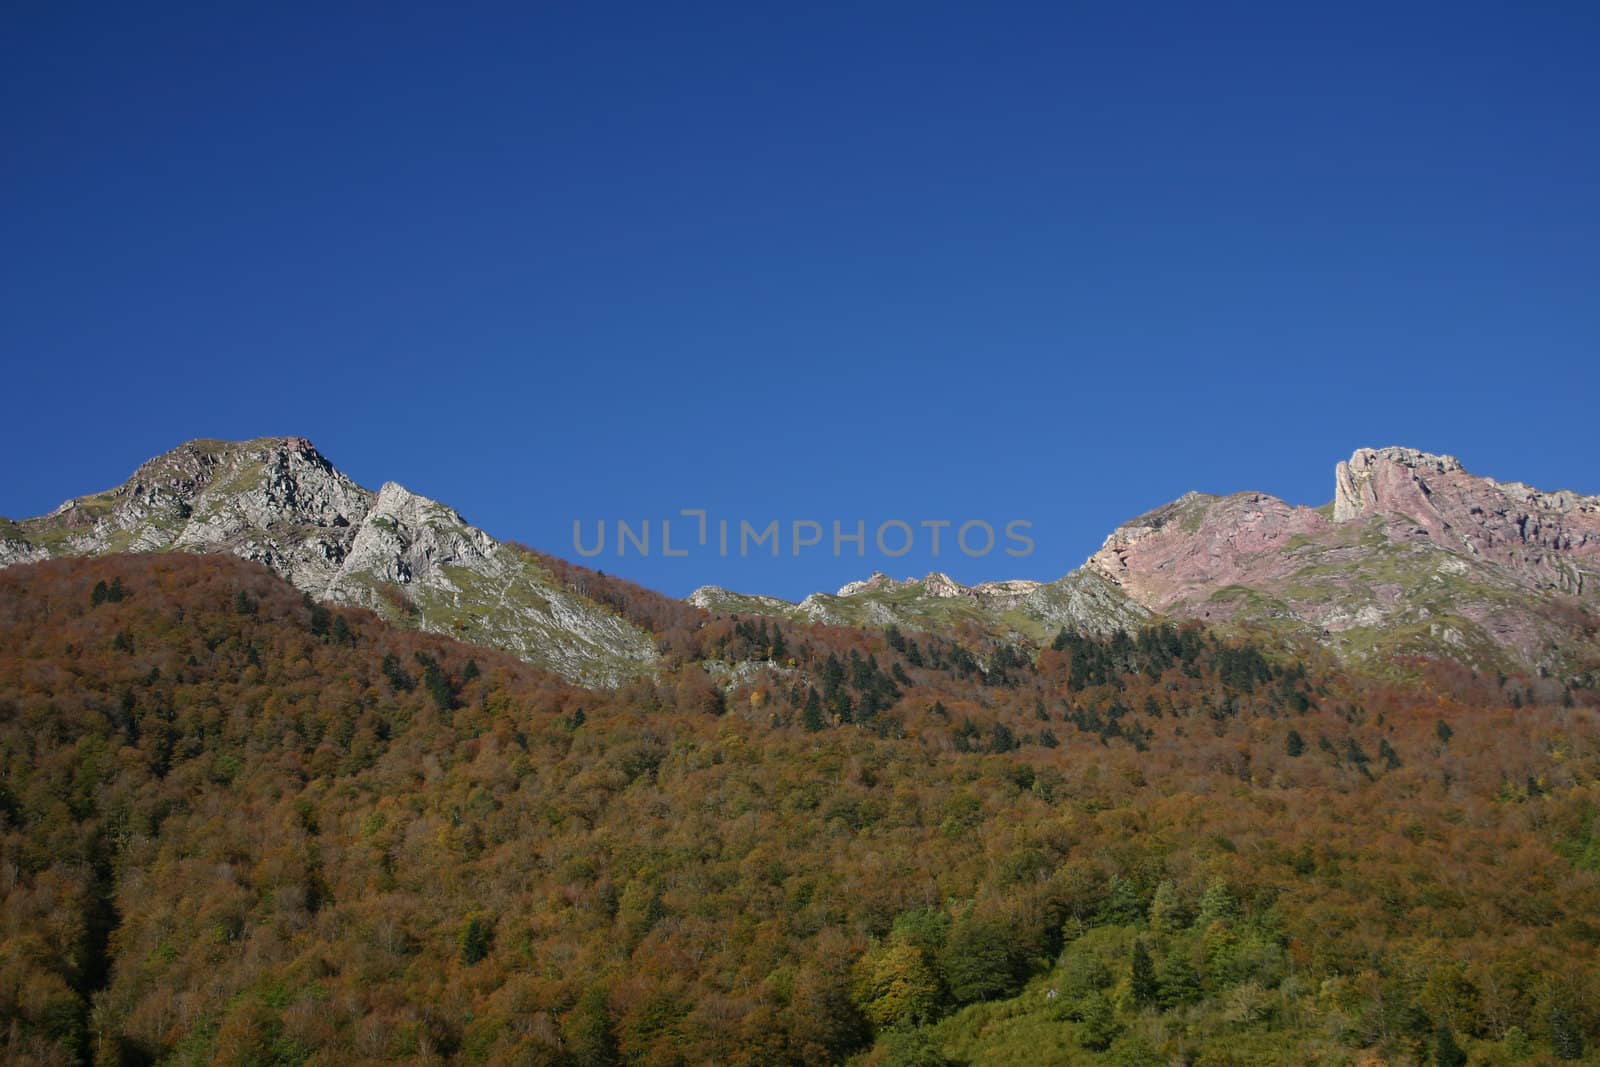  taken in the french (Pre)Pyrenees, department Pyrenees atlantique, plenty of copy space